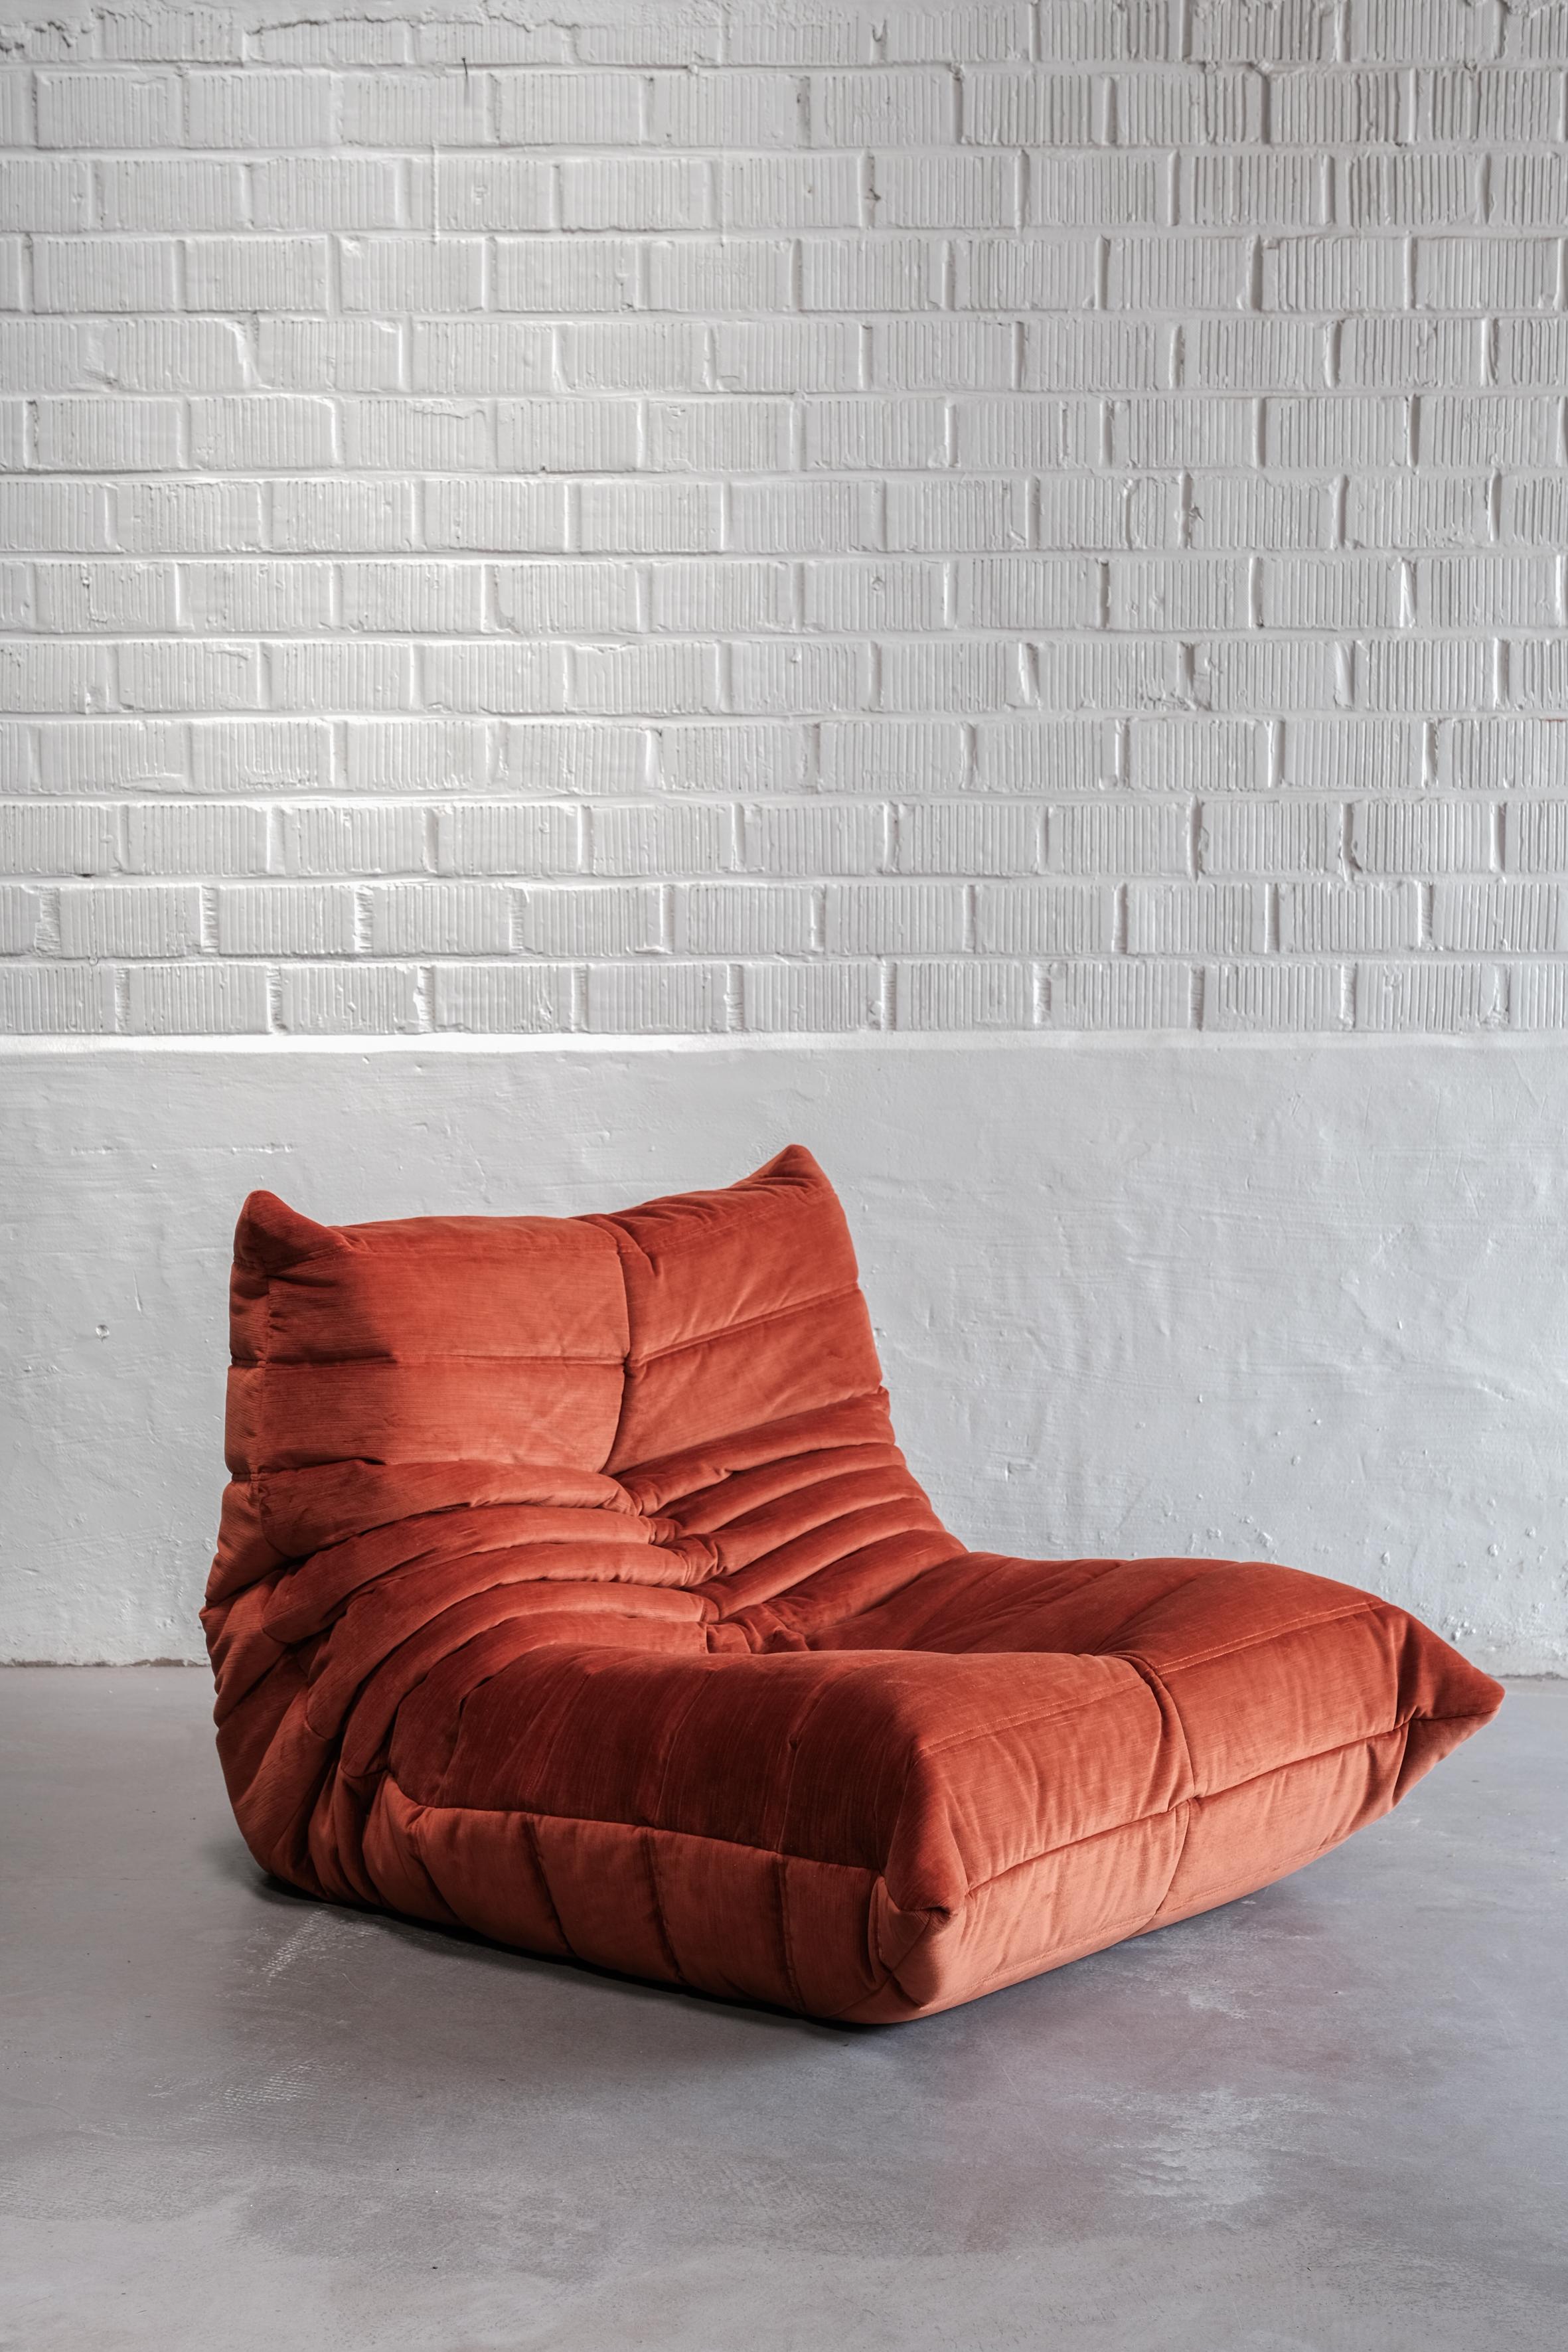 This ligne roset togo 1 seater has been reupholstered with a new orange / rusty high quality velvet. Foam is still original and in good condition. 

 